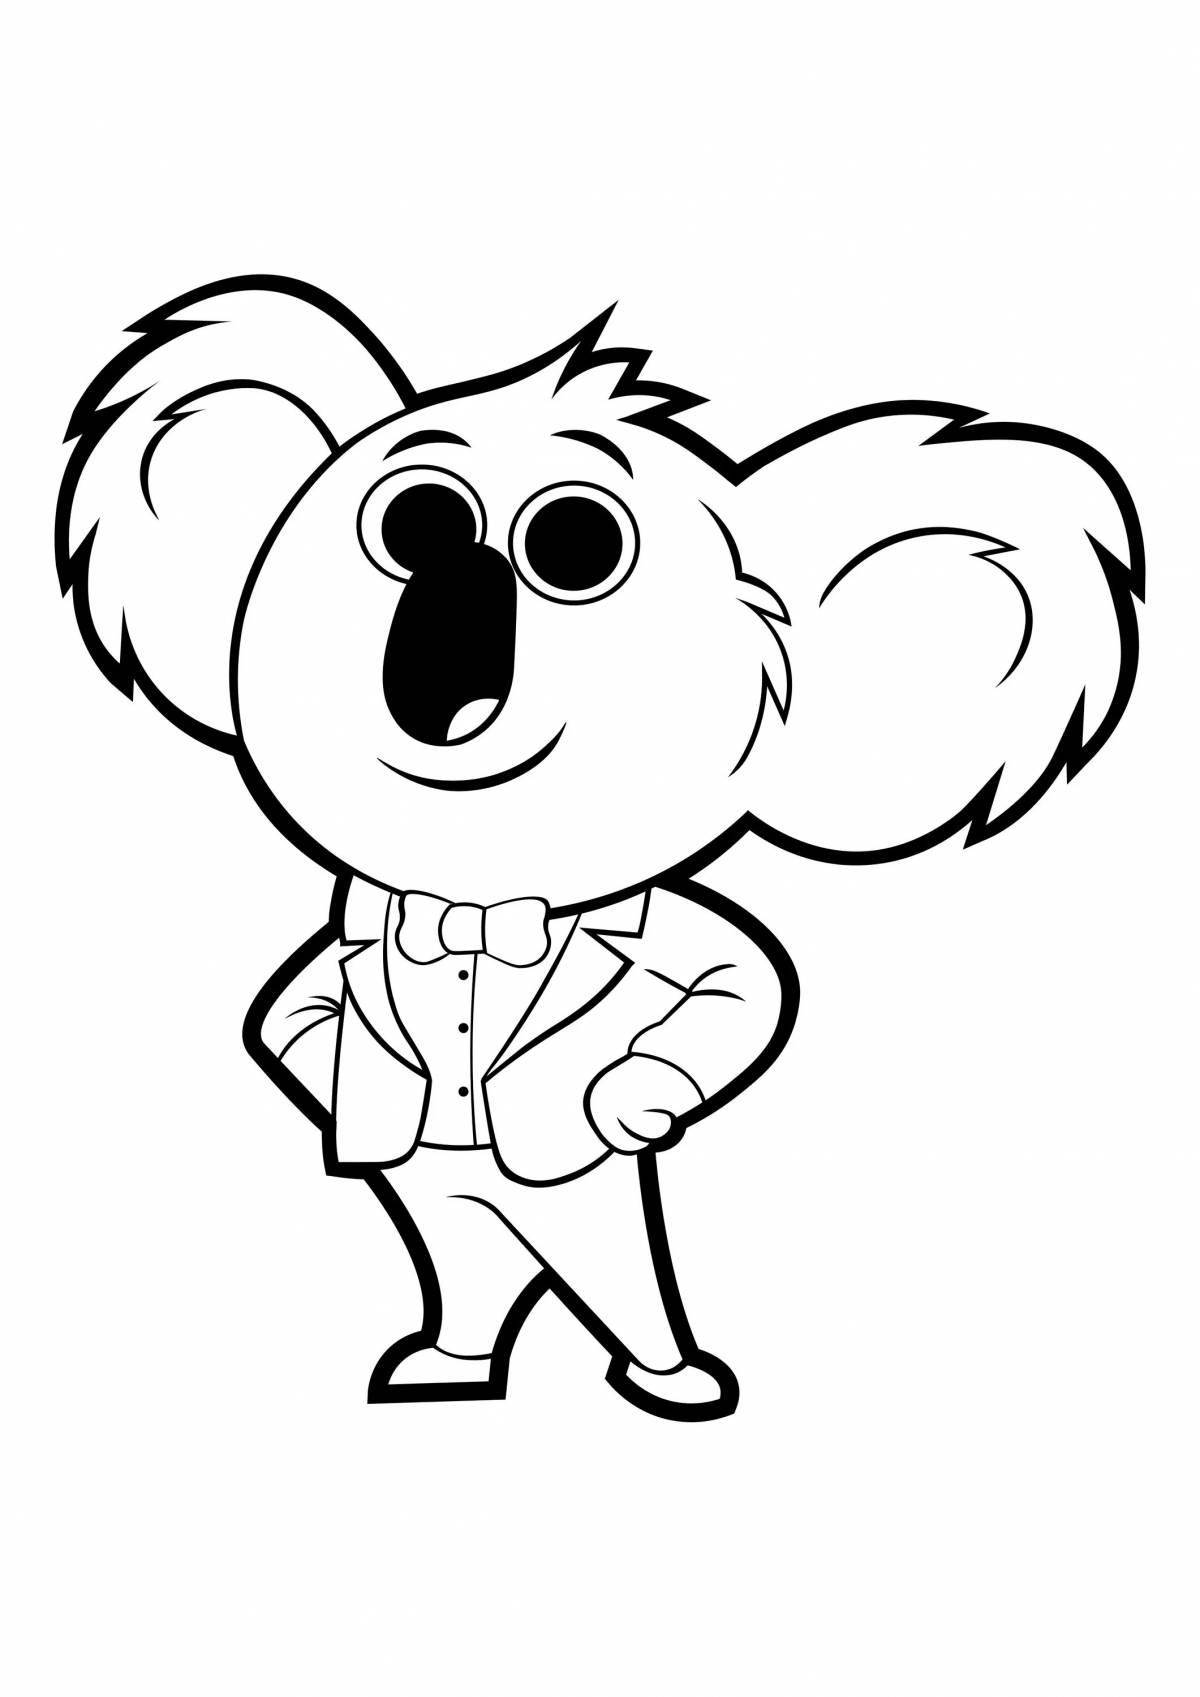 Charming buster coloring pages